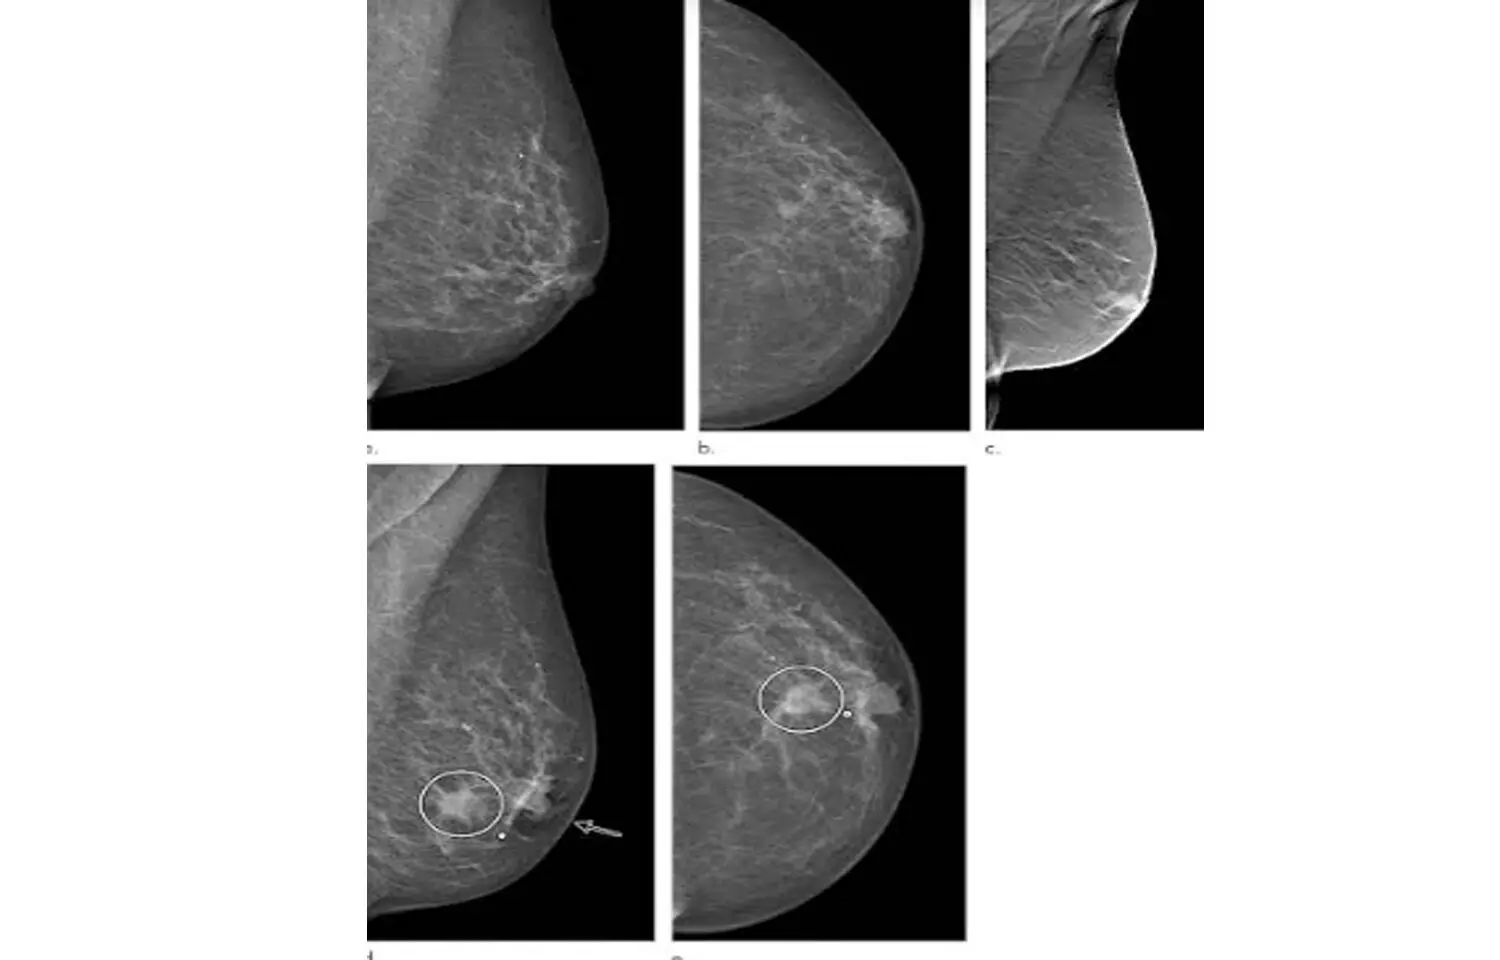 Hidden breast cancer after breast augmentation diagnosed by colour Doppler: BMJ case report